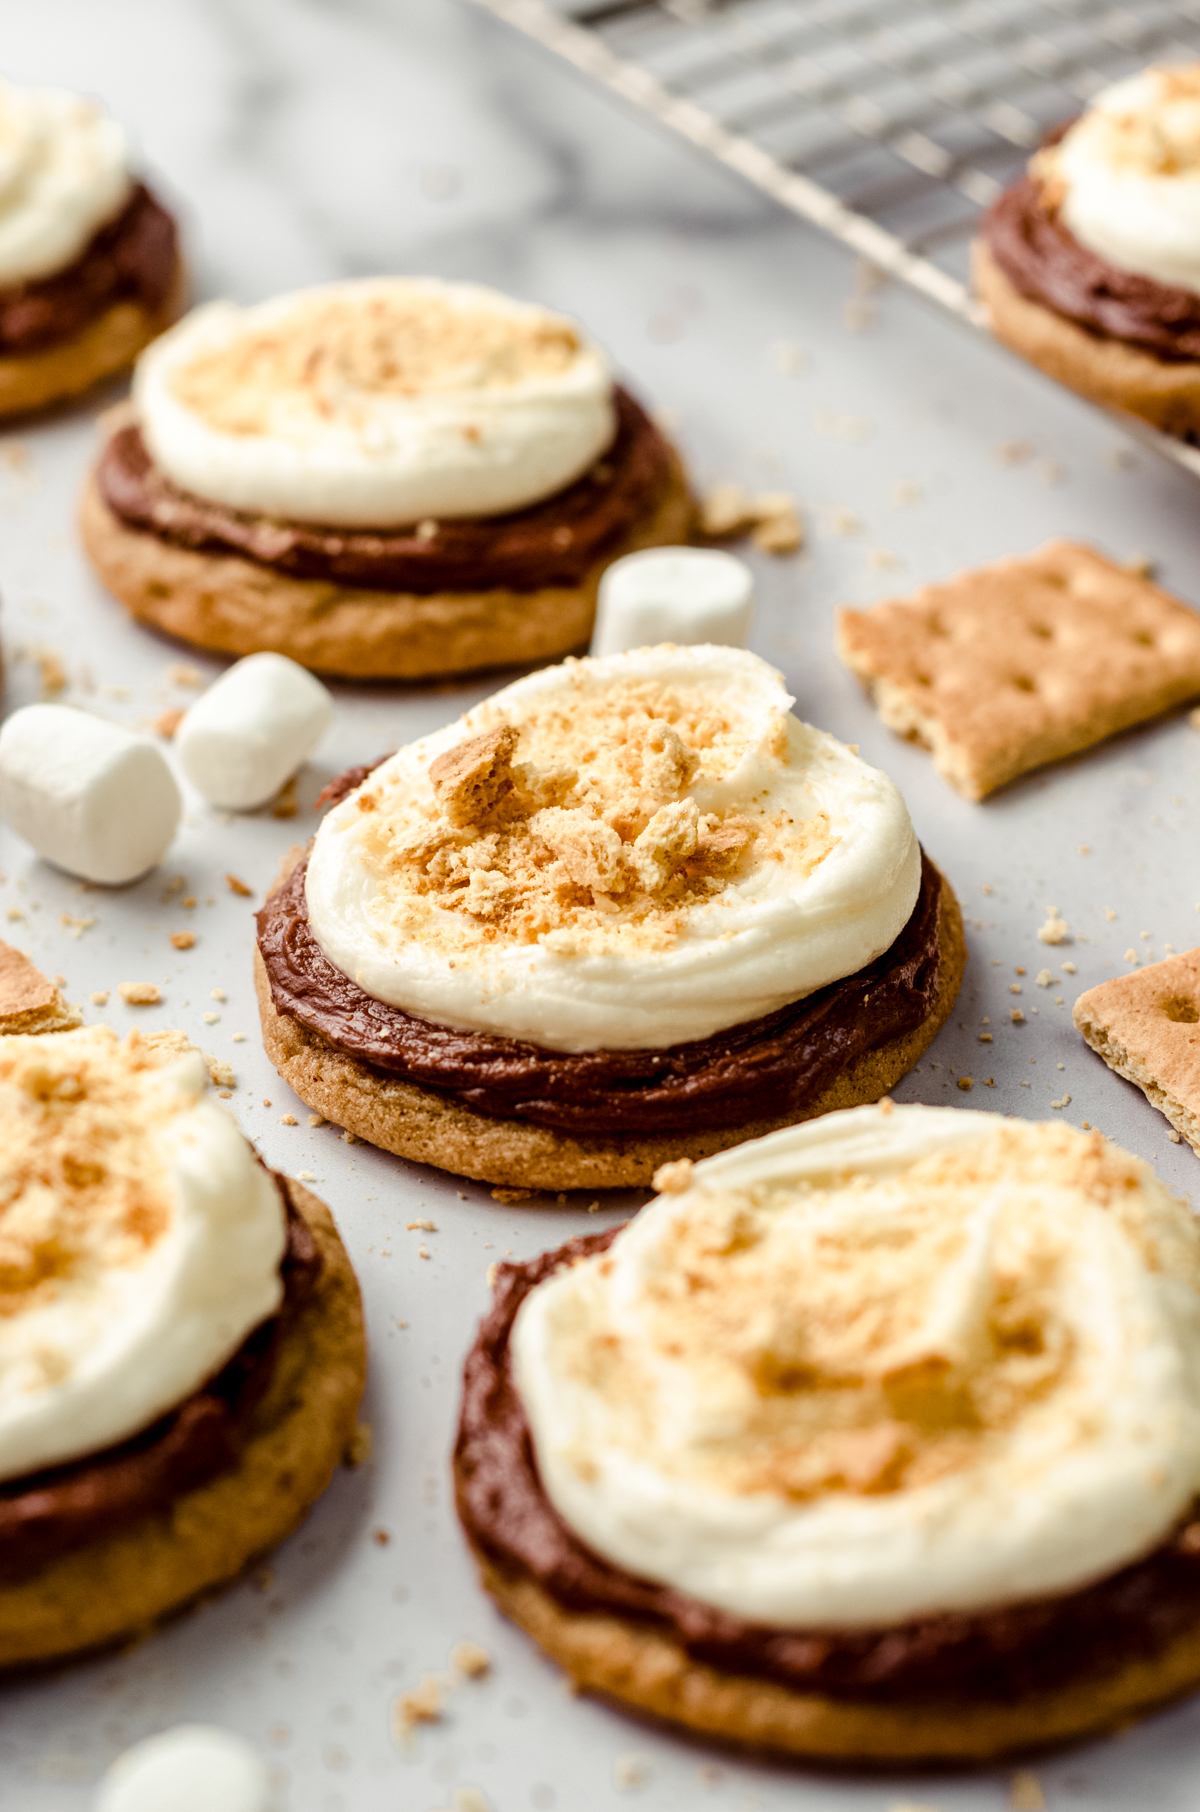 Frosted s'mores cookies on a surface with graham crackers and marshmallows scattered around.